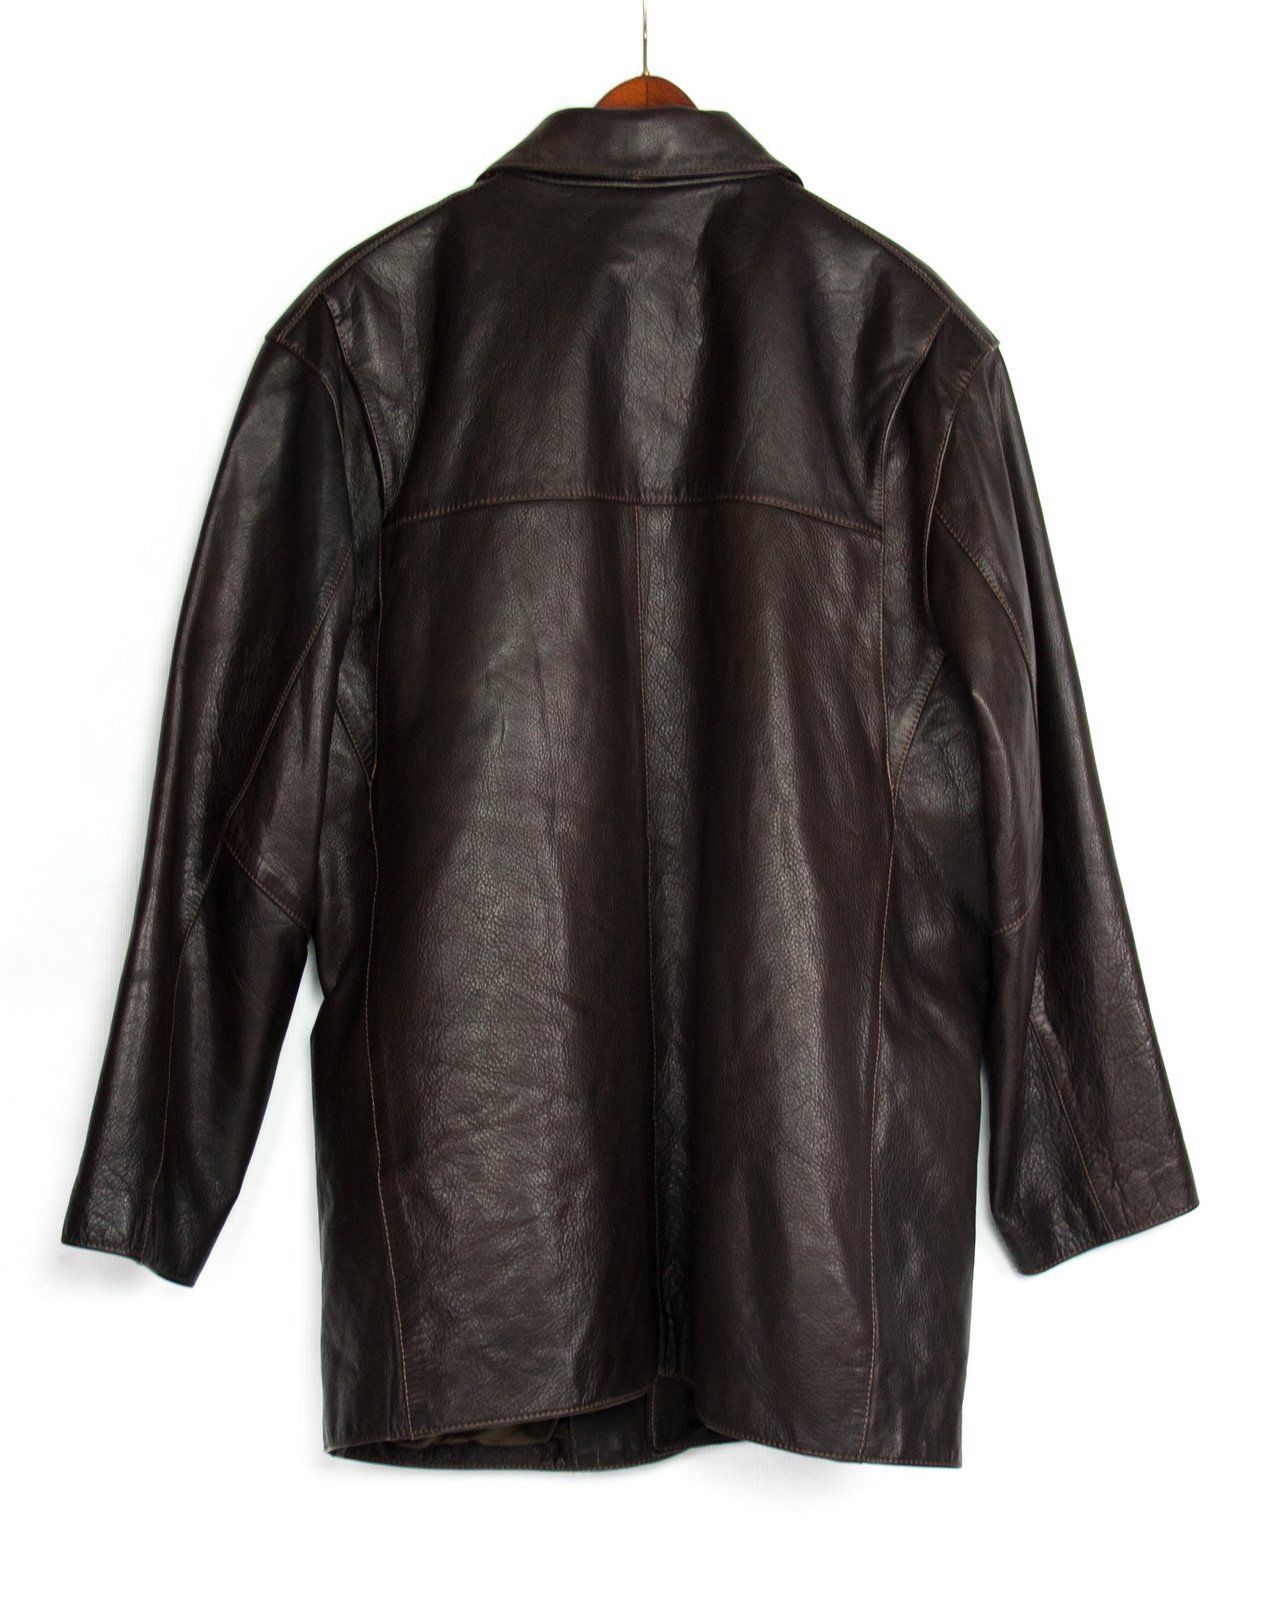 ANDREW MARC Very Soft Brown Leather Jacket With Removable Lining, L - secondfirst